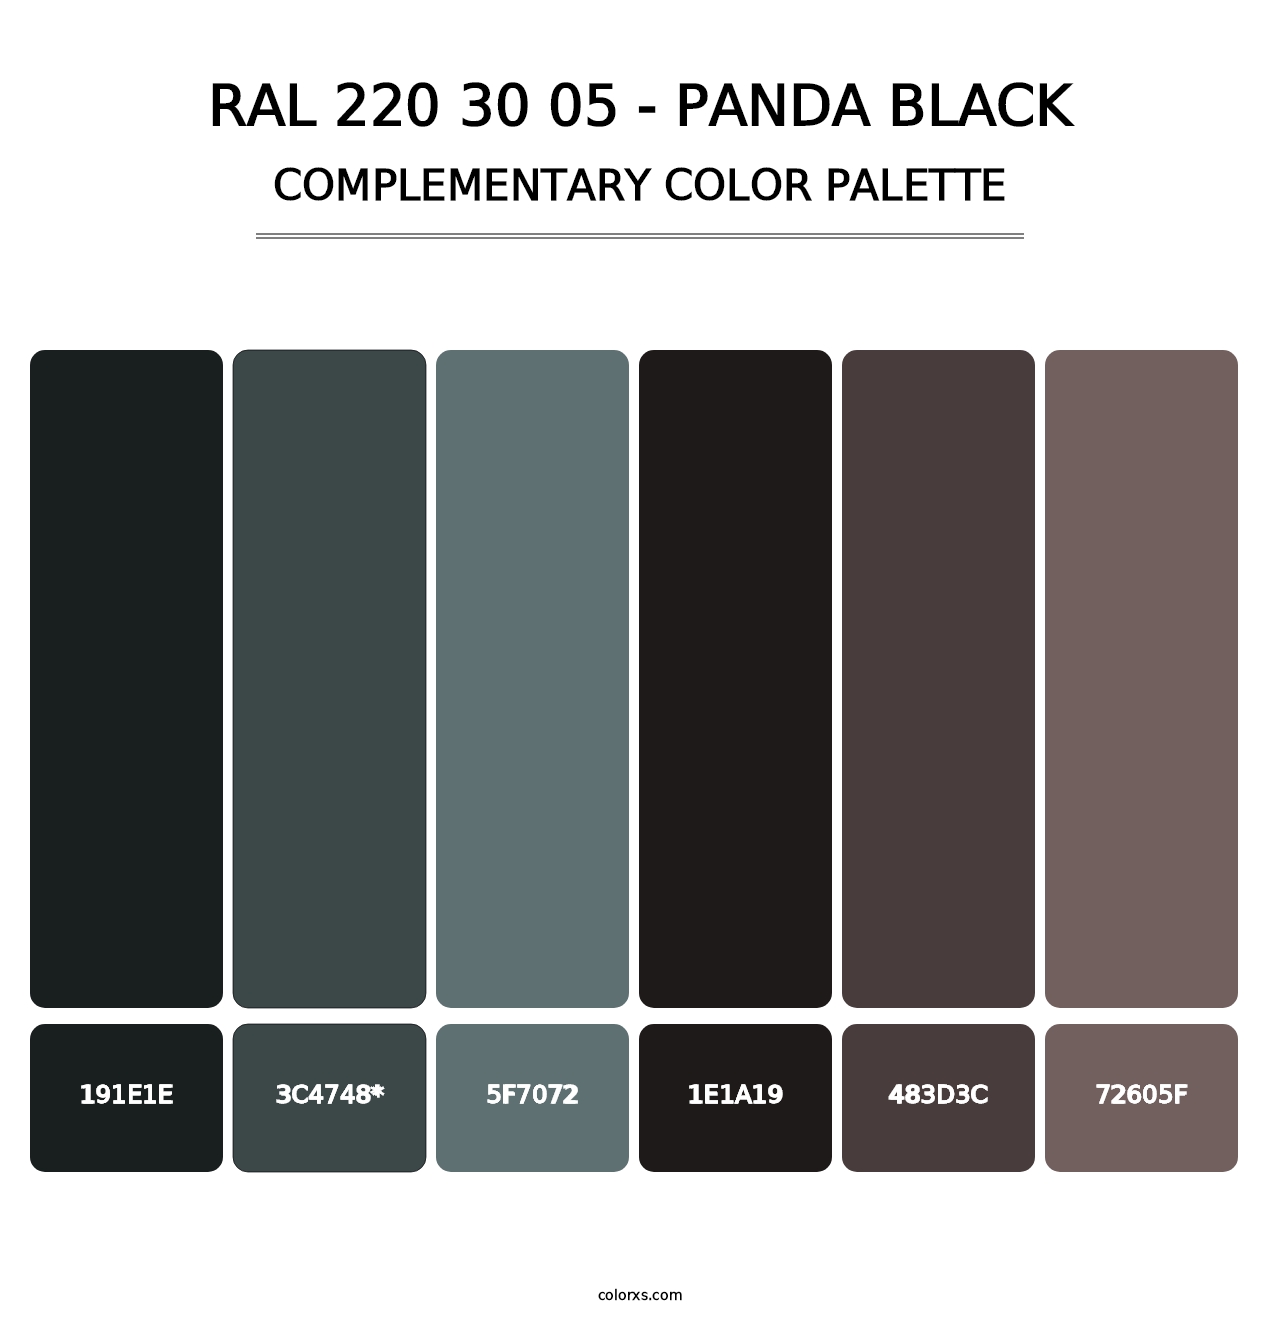 RAL 220 30 05 - Panda Black - Complementary Color Palette